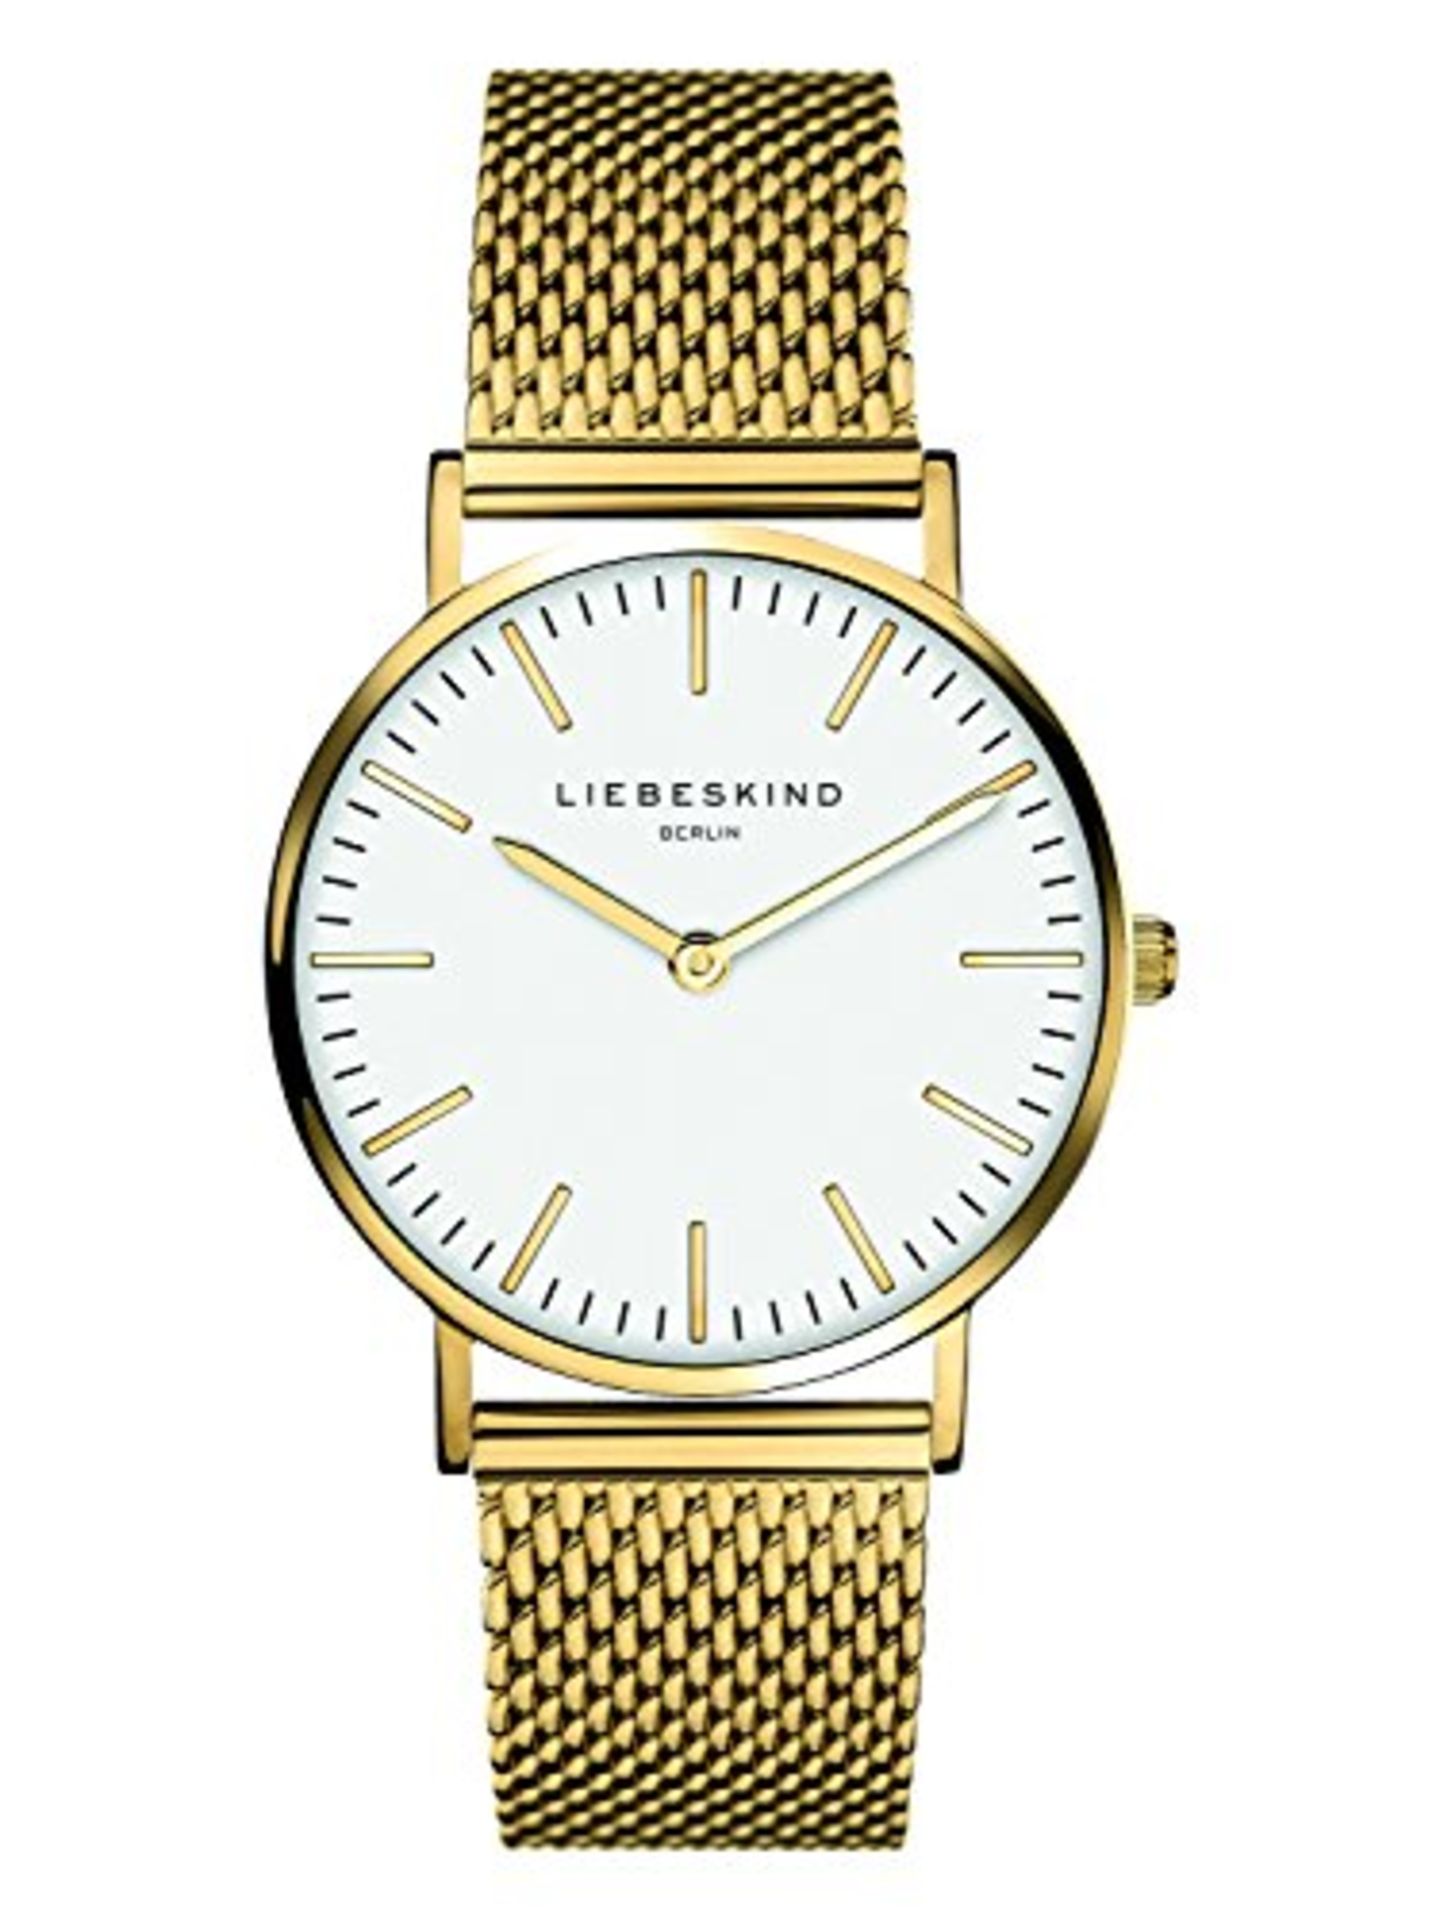 RRP £79.00 Beloved Women's Analog Quartz Watch with Stainless Steel, IP Gold-White